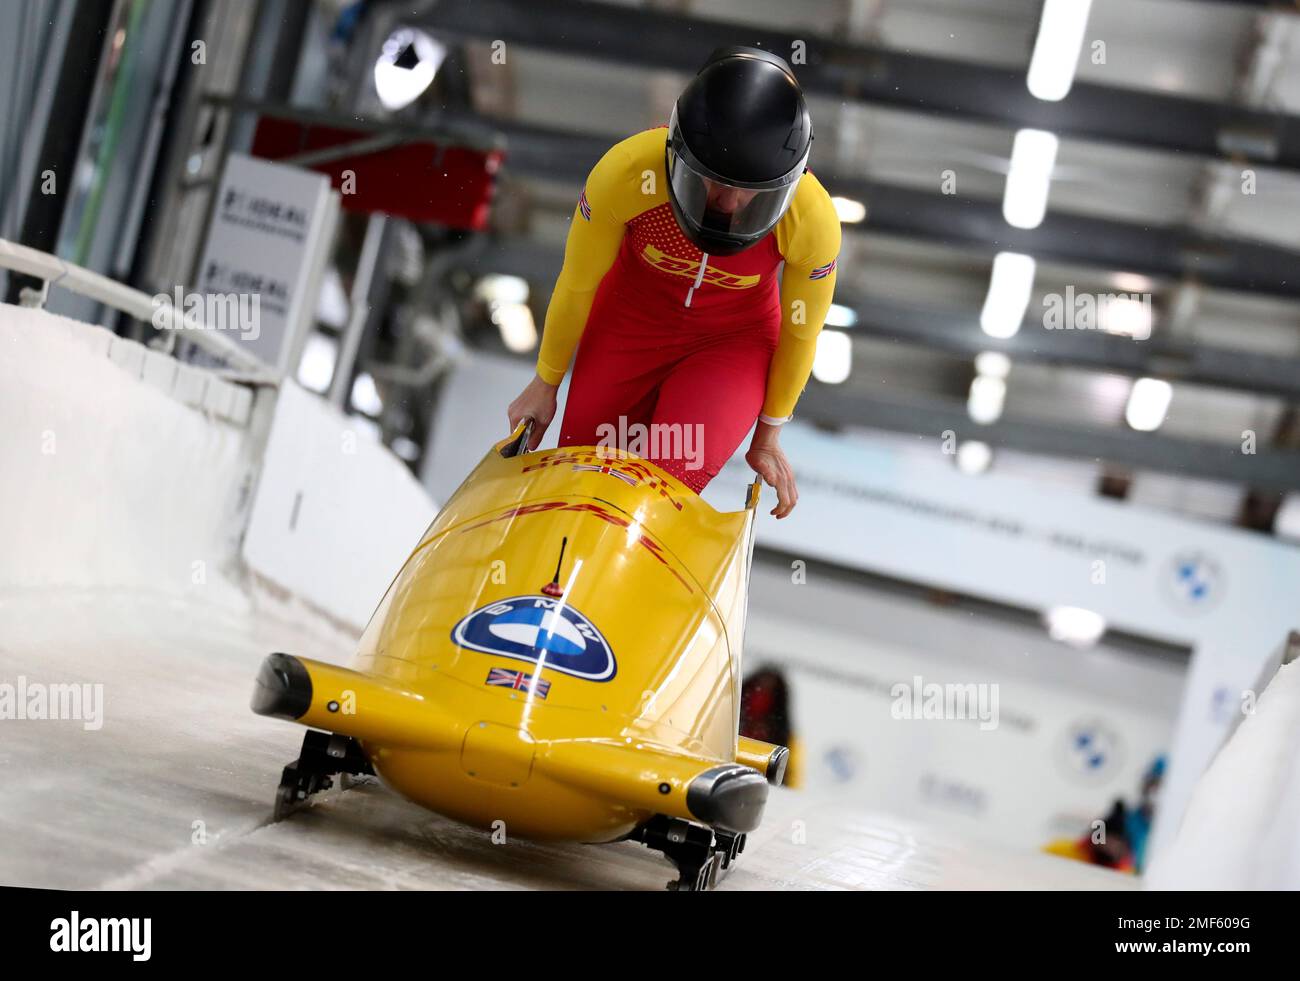 Great Britains bobsleigh pilot Mica McNeill at the start of the womens monobob race at the Bobsleigh and Skeleton World Championships in Altenberg, Germany, Saturday, Feb.13, 2021